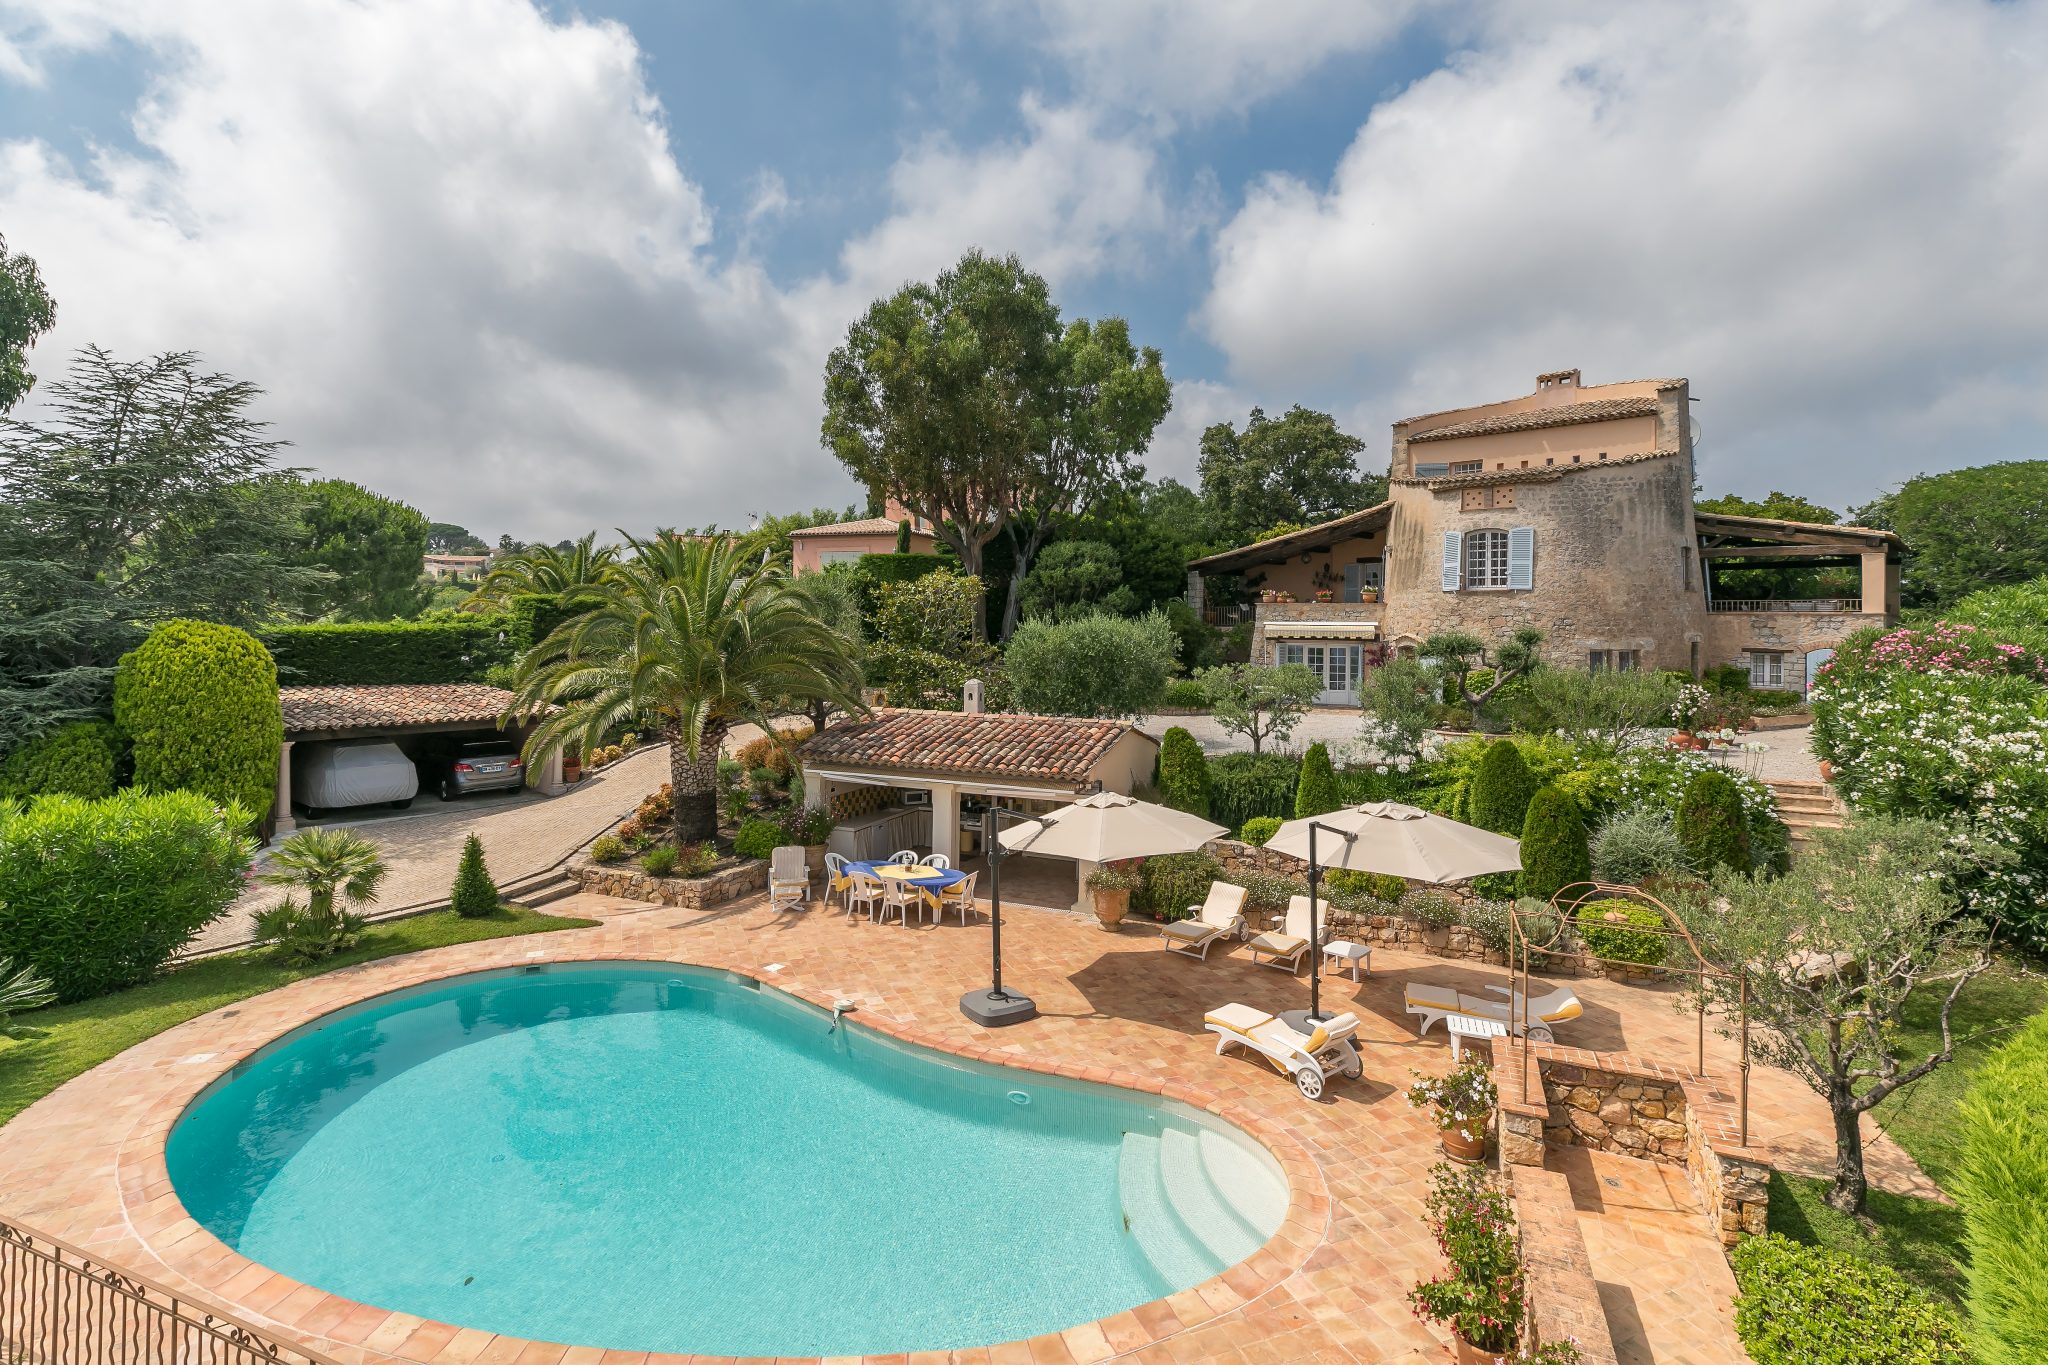 6 of the best reasons to buy property on the French Riviera | The ...